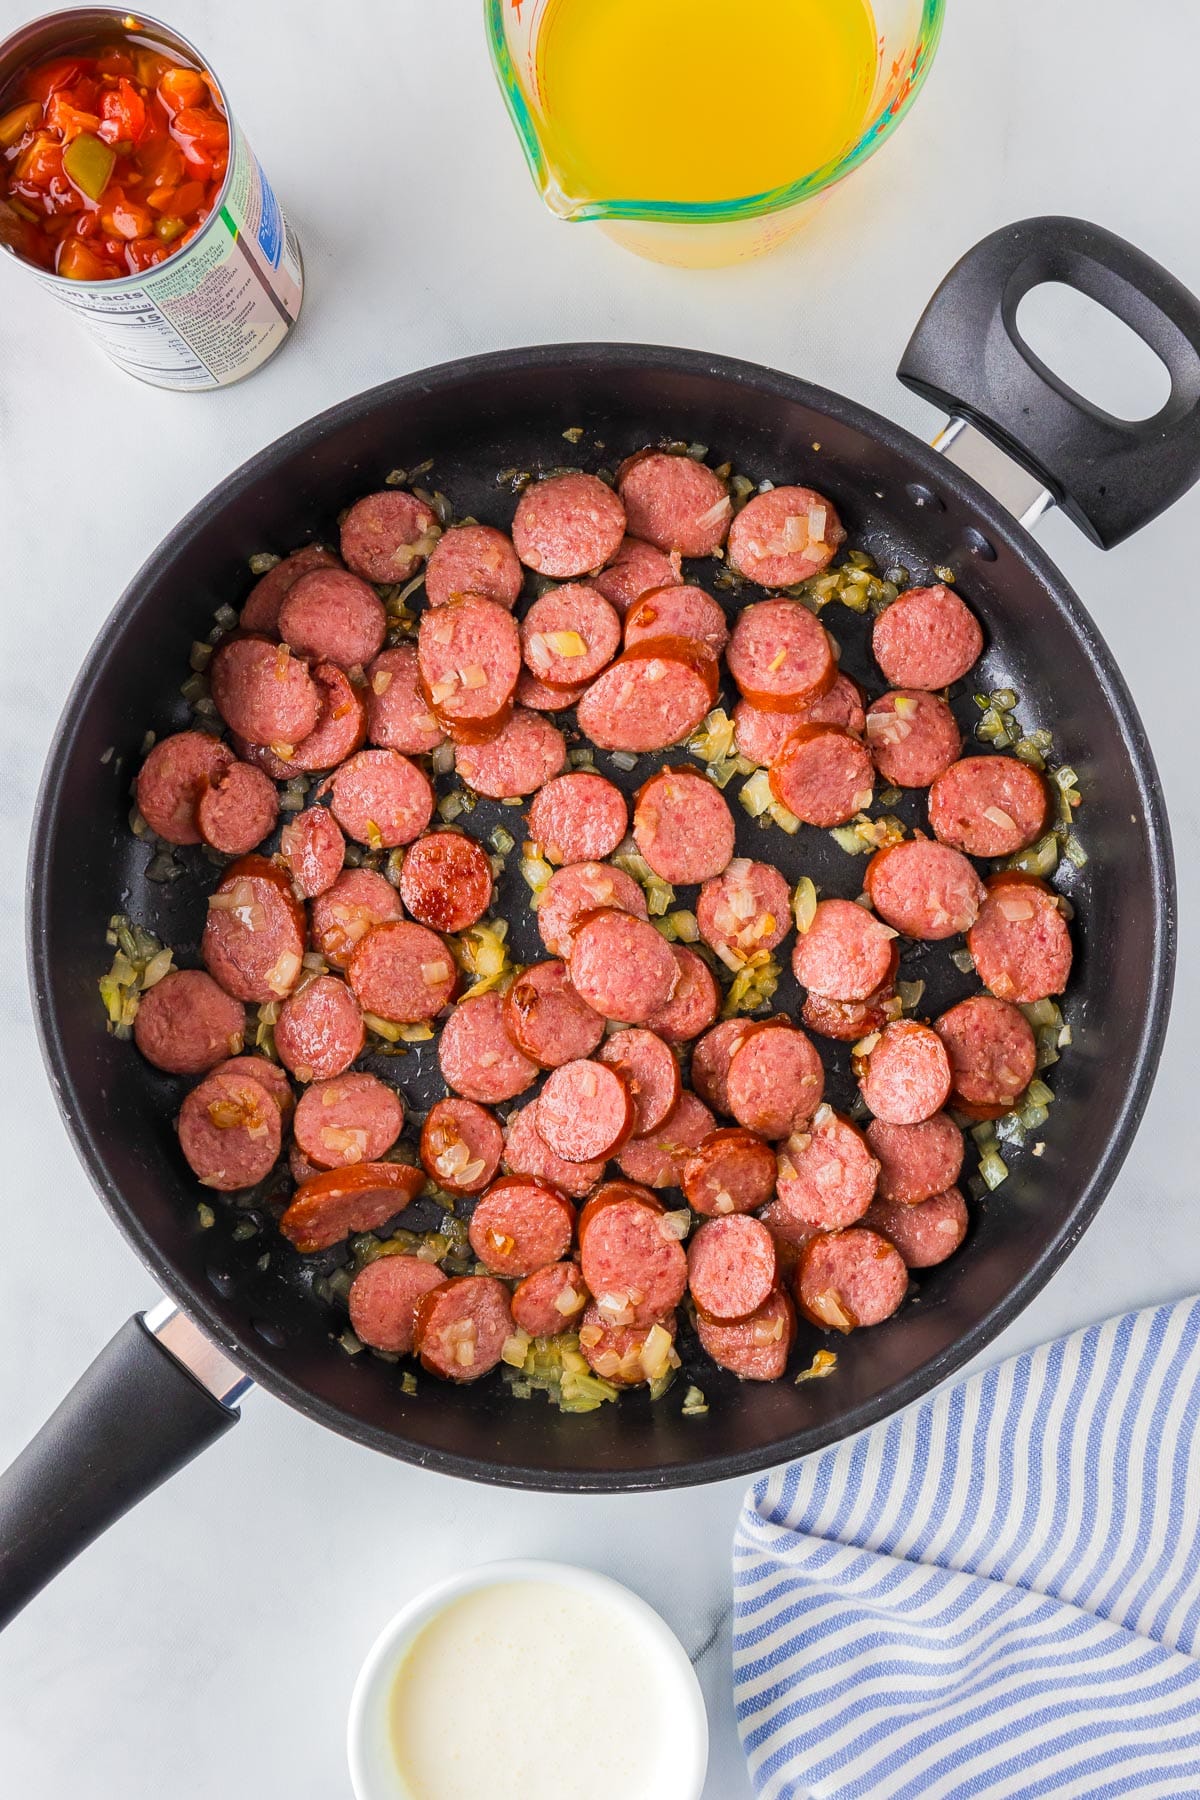 A frying pan contains browned sliced sausages and onions. Nearby on the counter are a can of green chili diced tomatoes, chicken broth and a bowl of heavy cream.